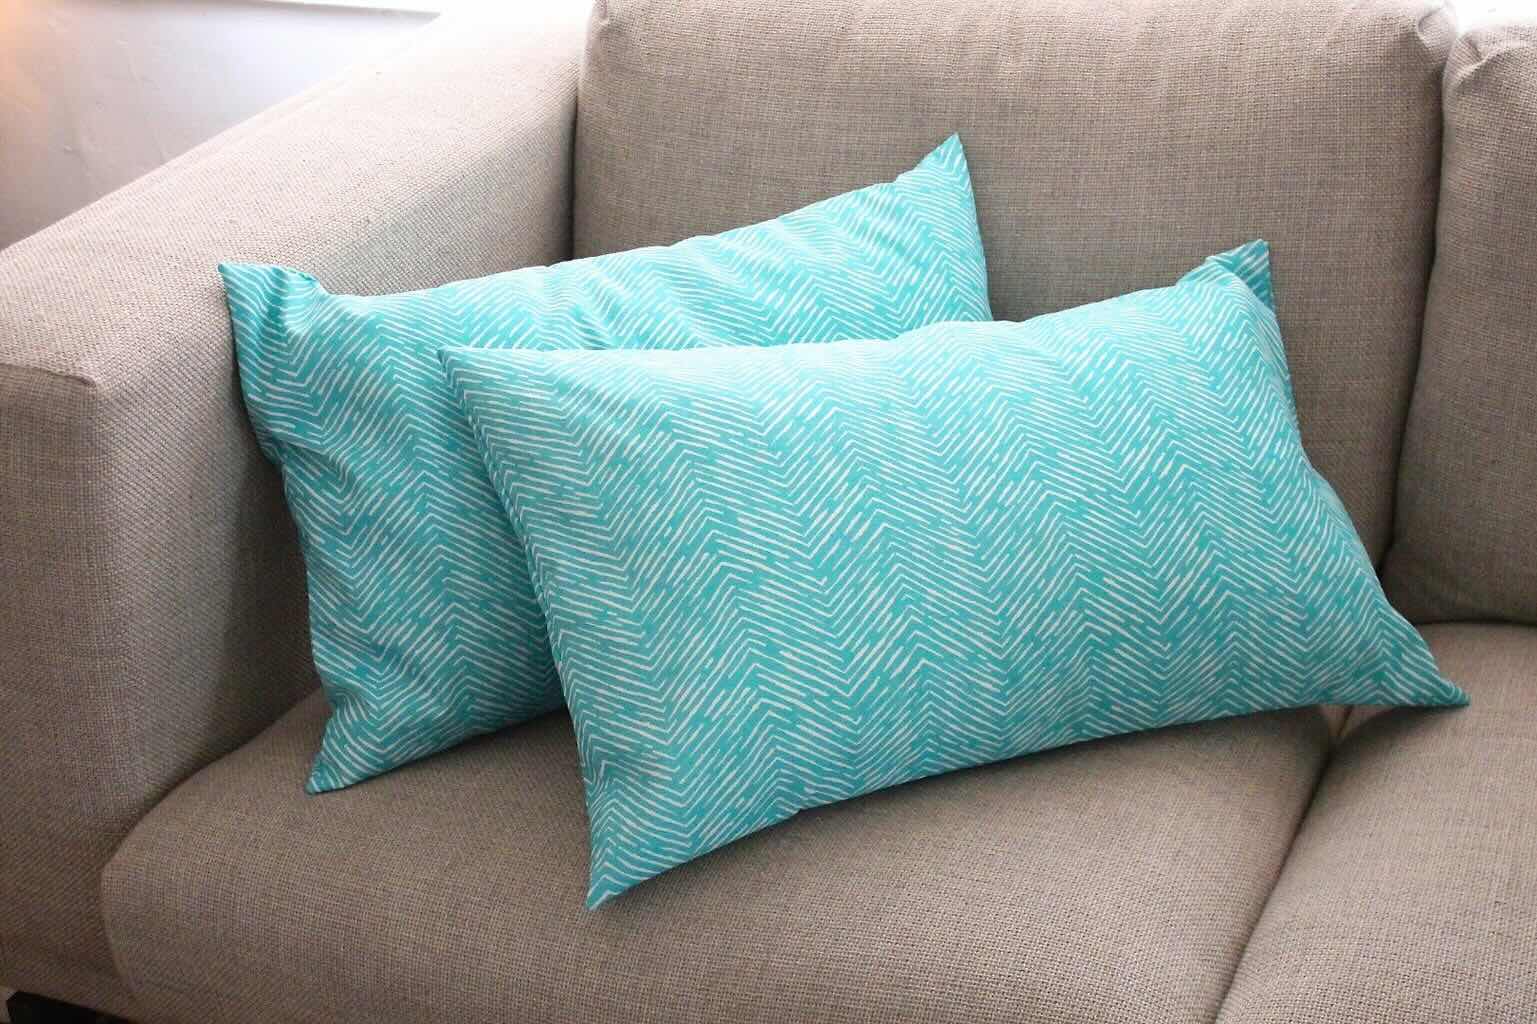 How Many Pillows Can You Make From 1 Yard Of Fabric